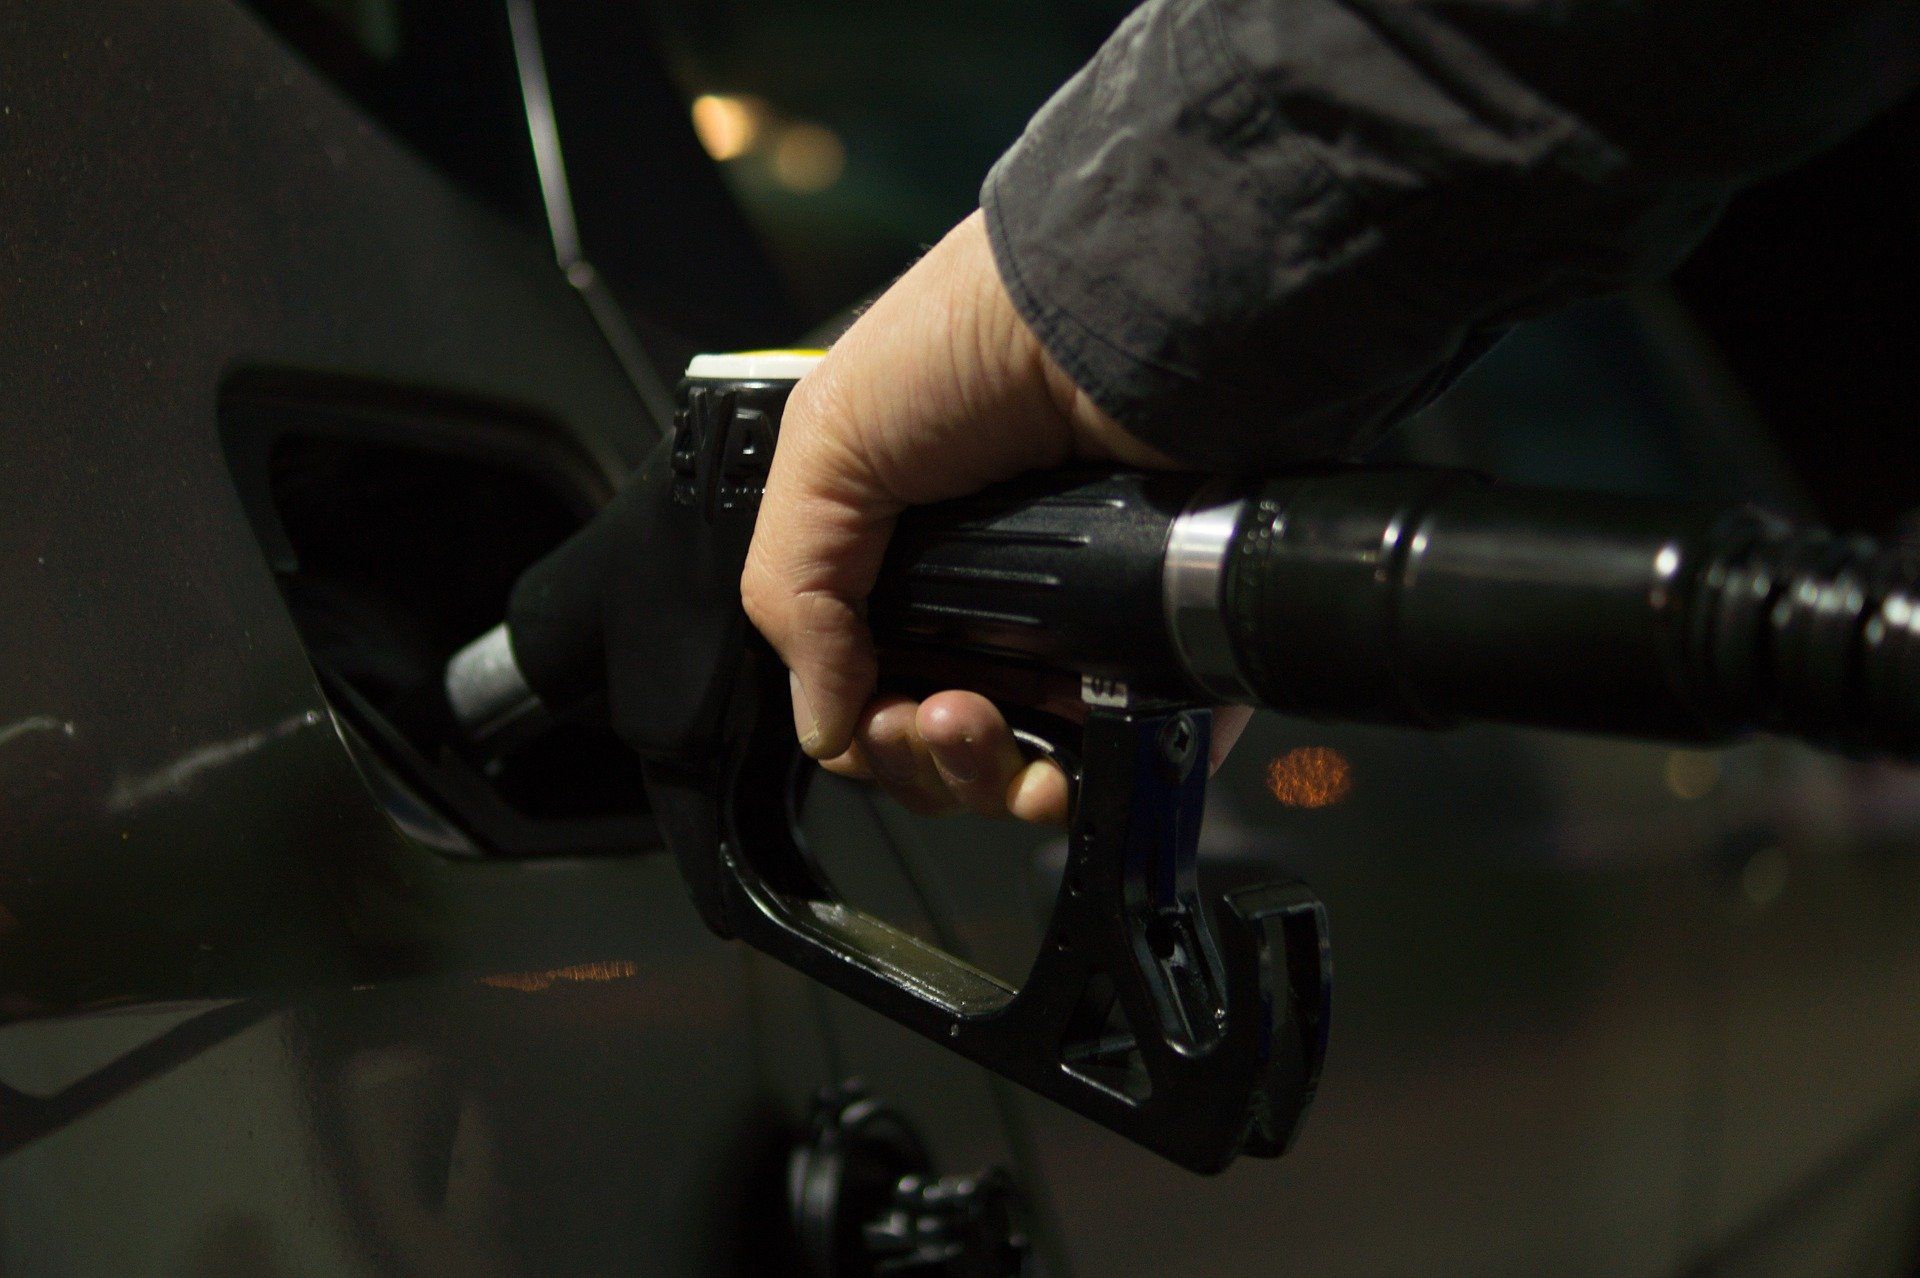 Fuel prices: Petrol priced at Rs 95.41, diesel Rs 86.67 in Delhi on February 16, 2022